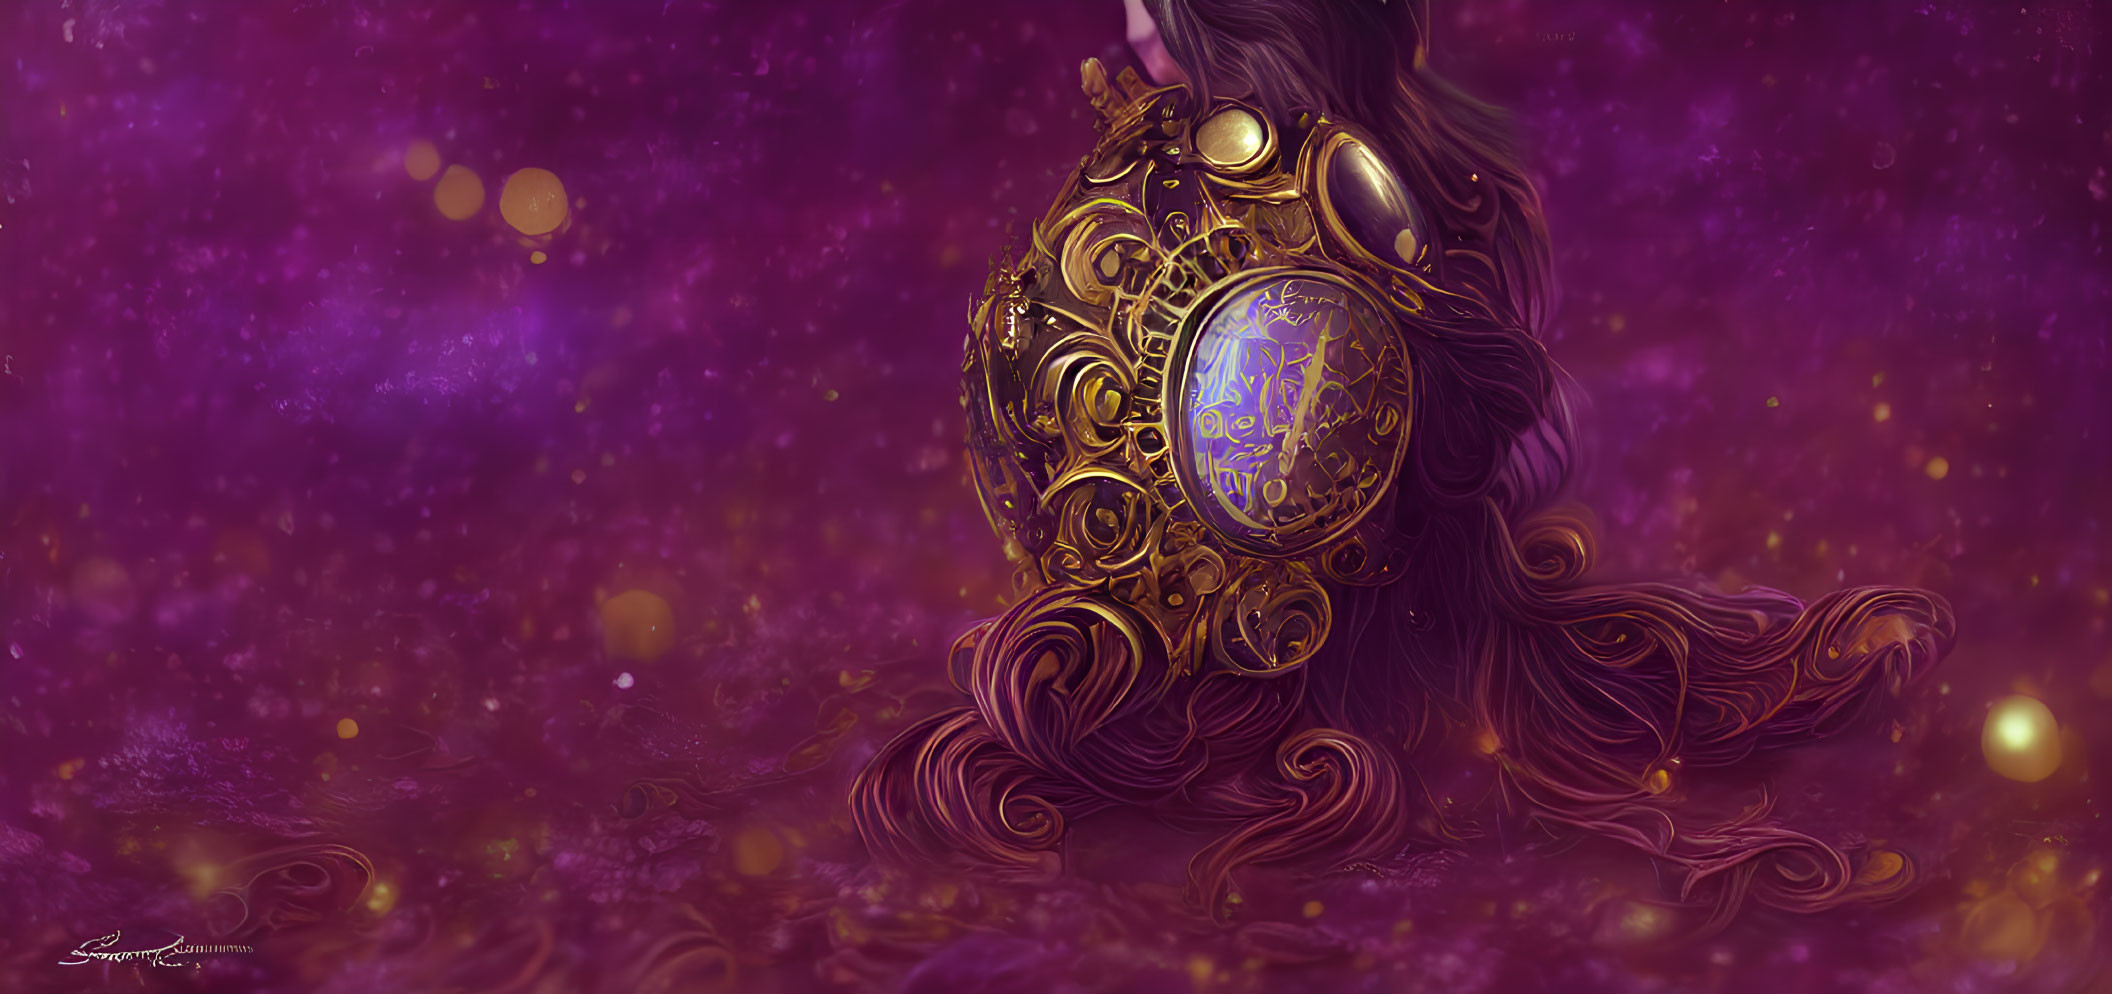 Intricate golden egg in mystical purple atmosphere